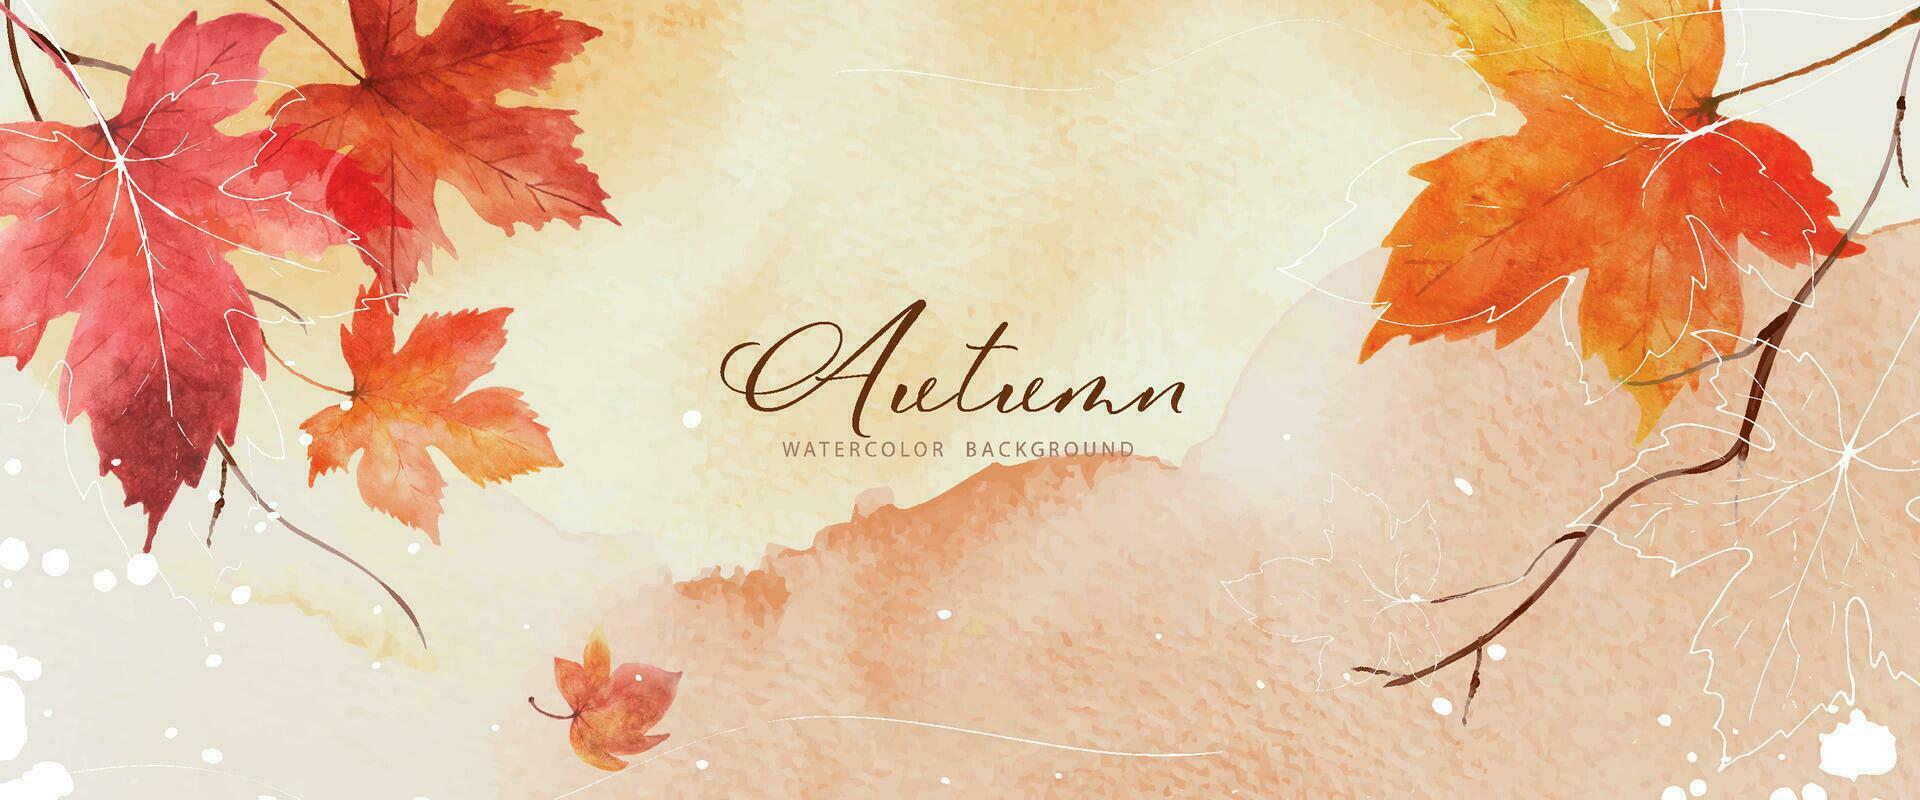 Abstract art autumn background with orange maple leaves watercolor vector